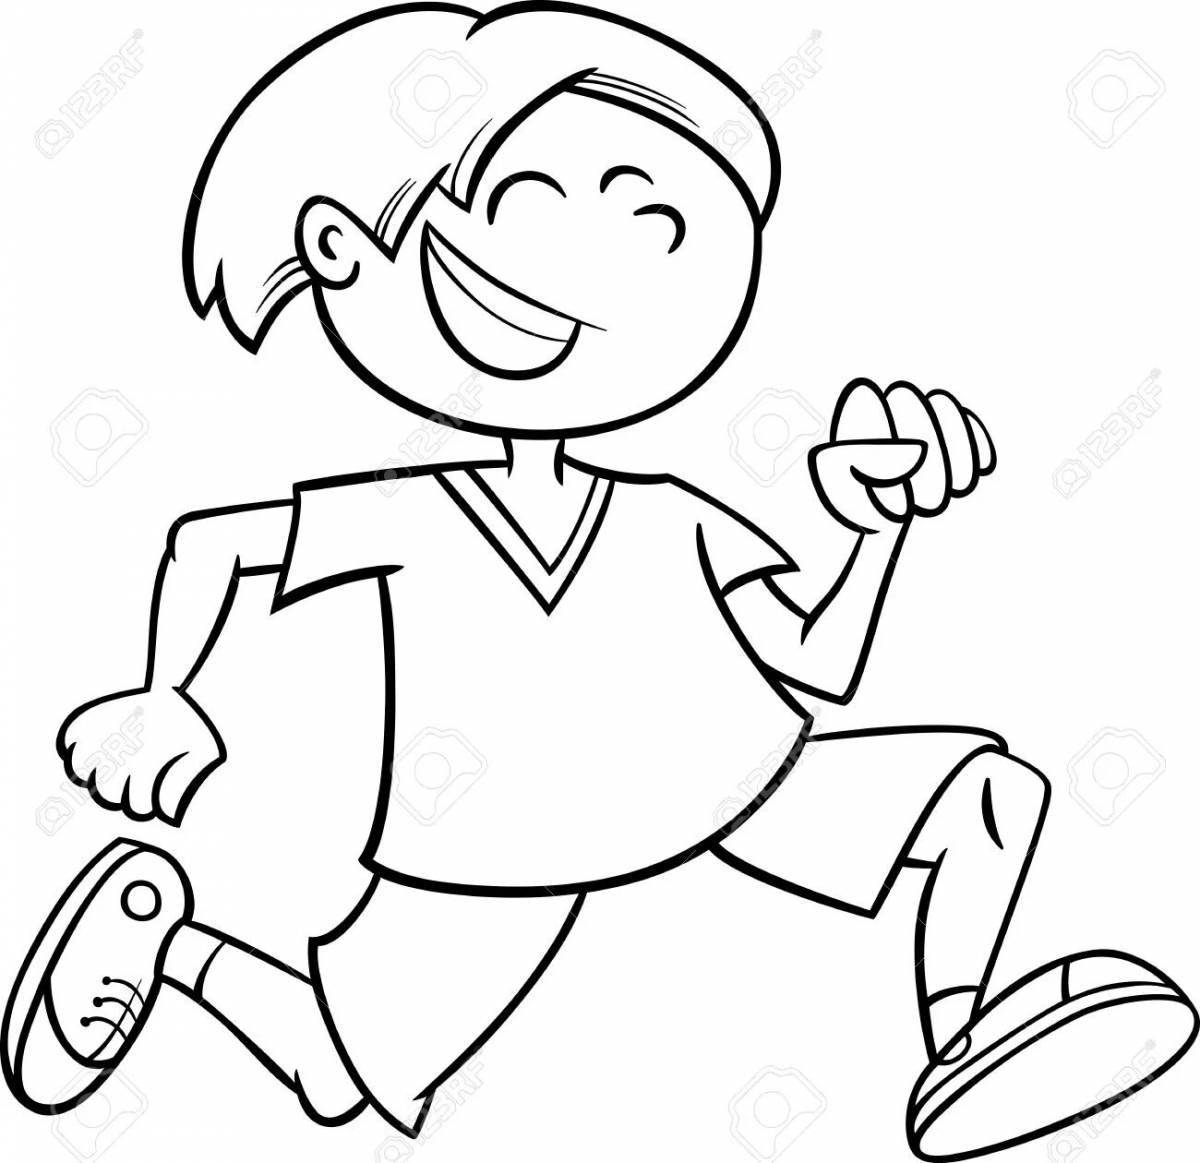 Coloring page bright running boy